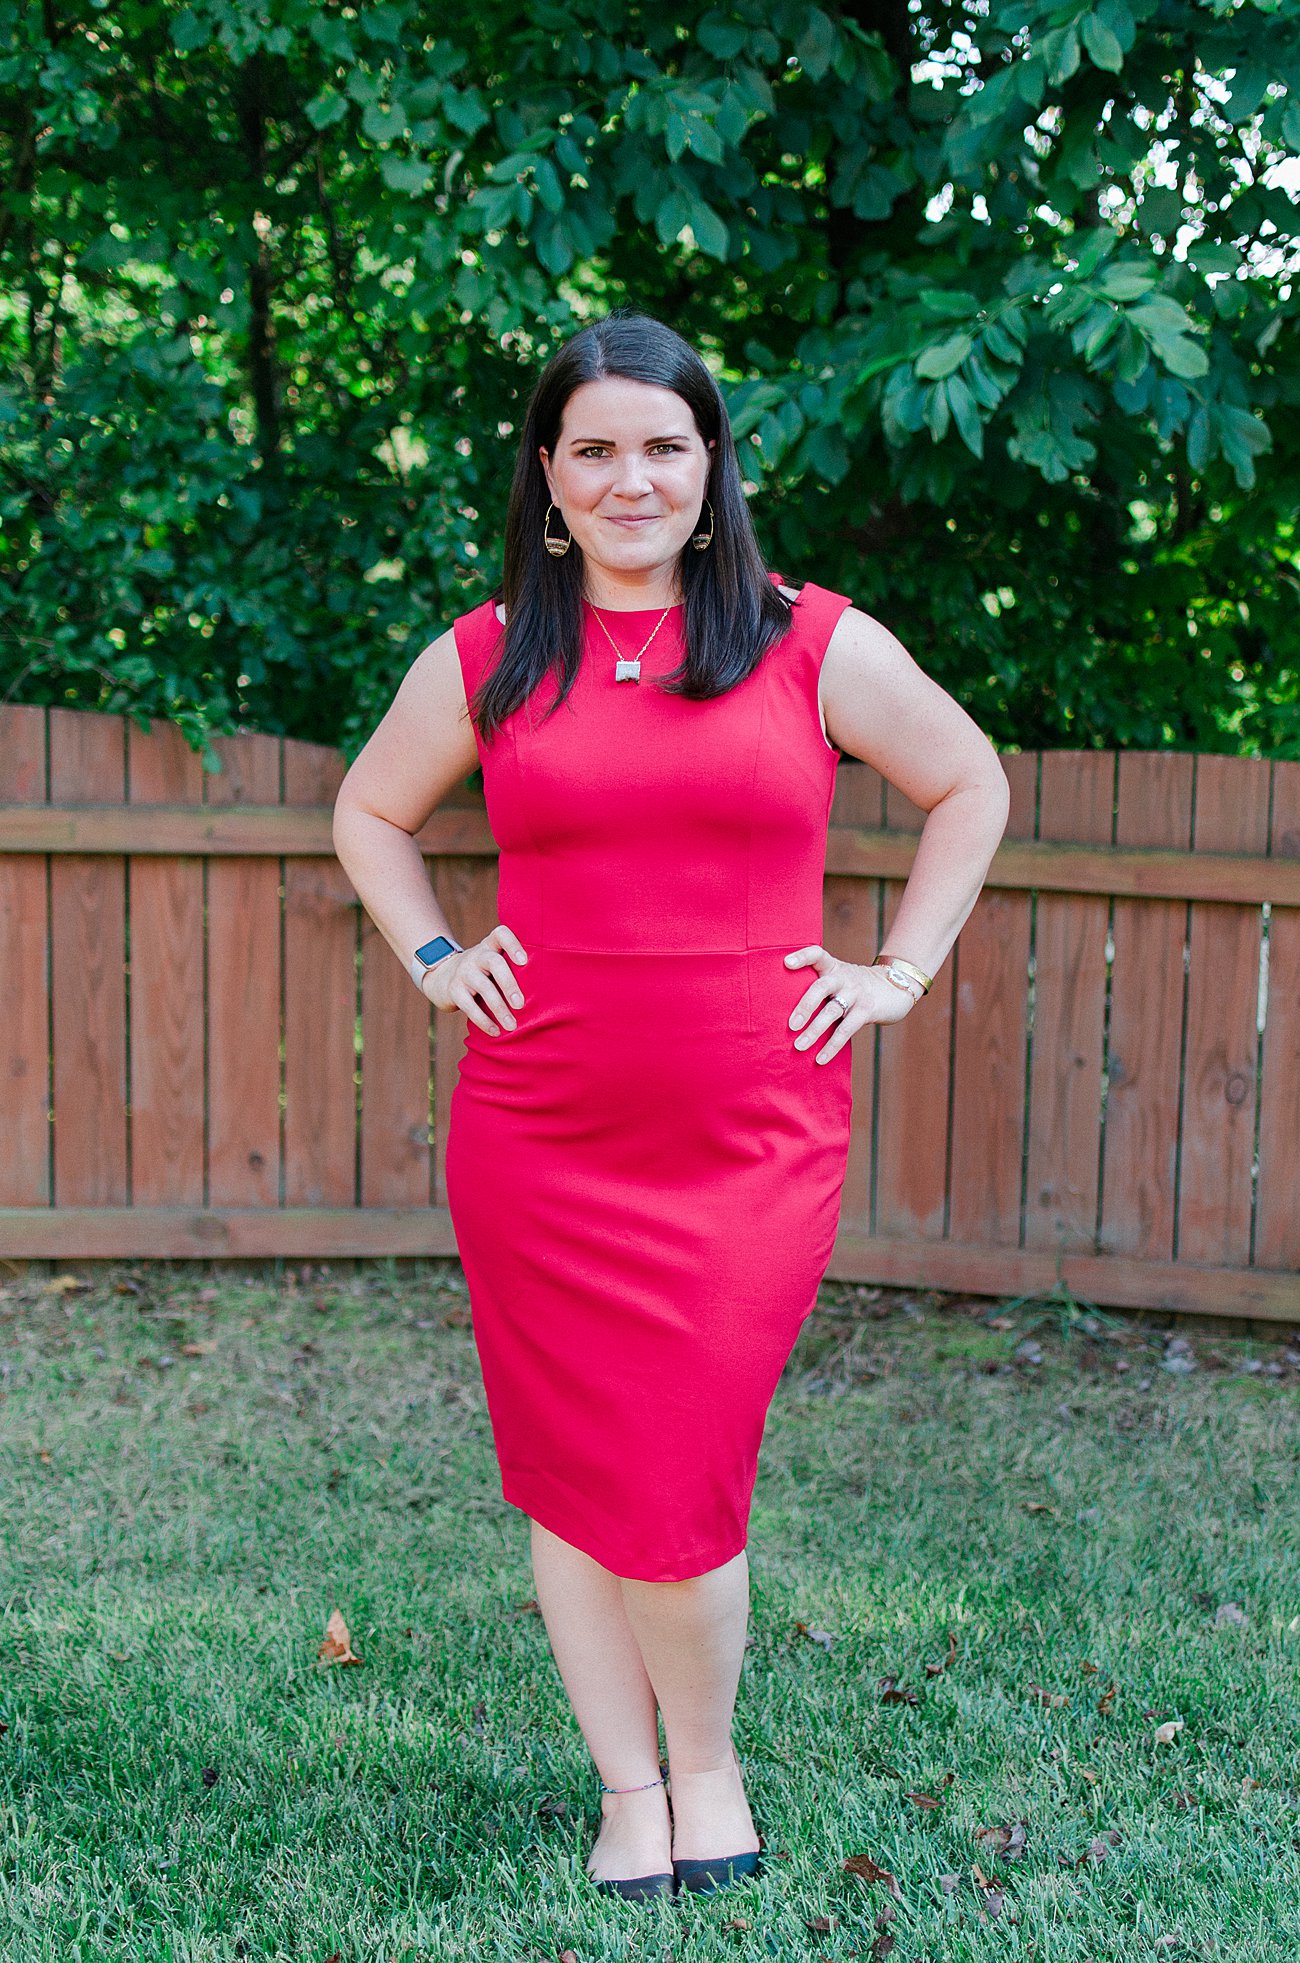 Stitch Fix Mystic Los Angeles - "Nyla Ponte Knit Dress" - Size XL - $58 (Made in the USA) - Stitch Fix Review #46 by NC fashion blogger Still Being Molly